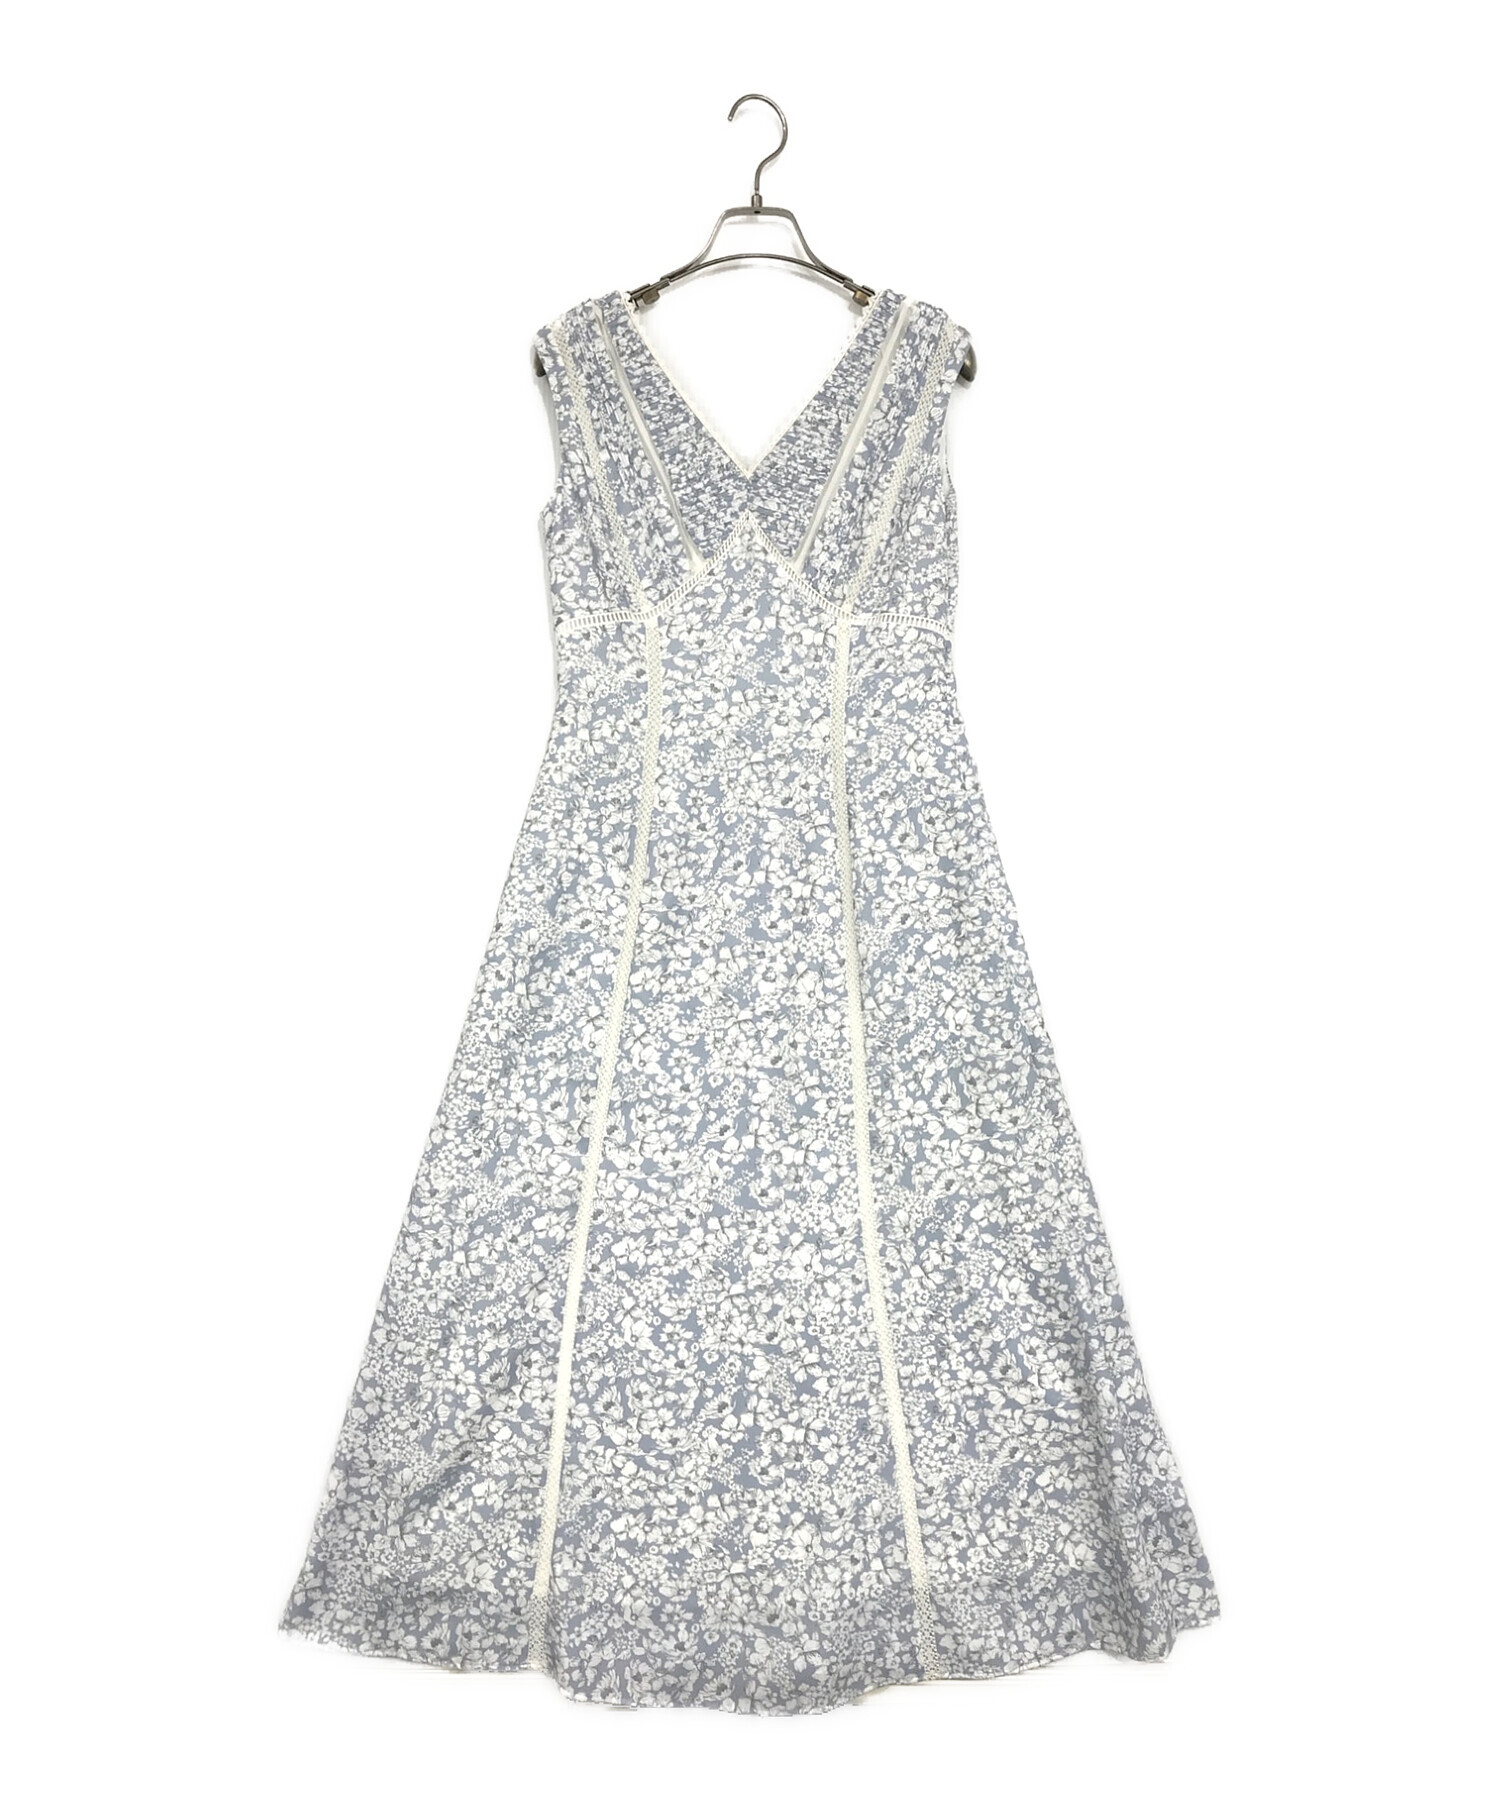 herliptoHer lip to Lace Trimmed Floral Dress S - ロングワンピース